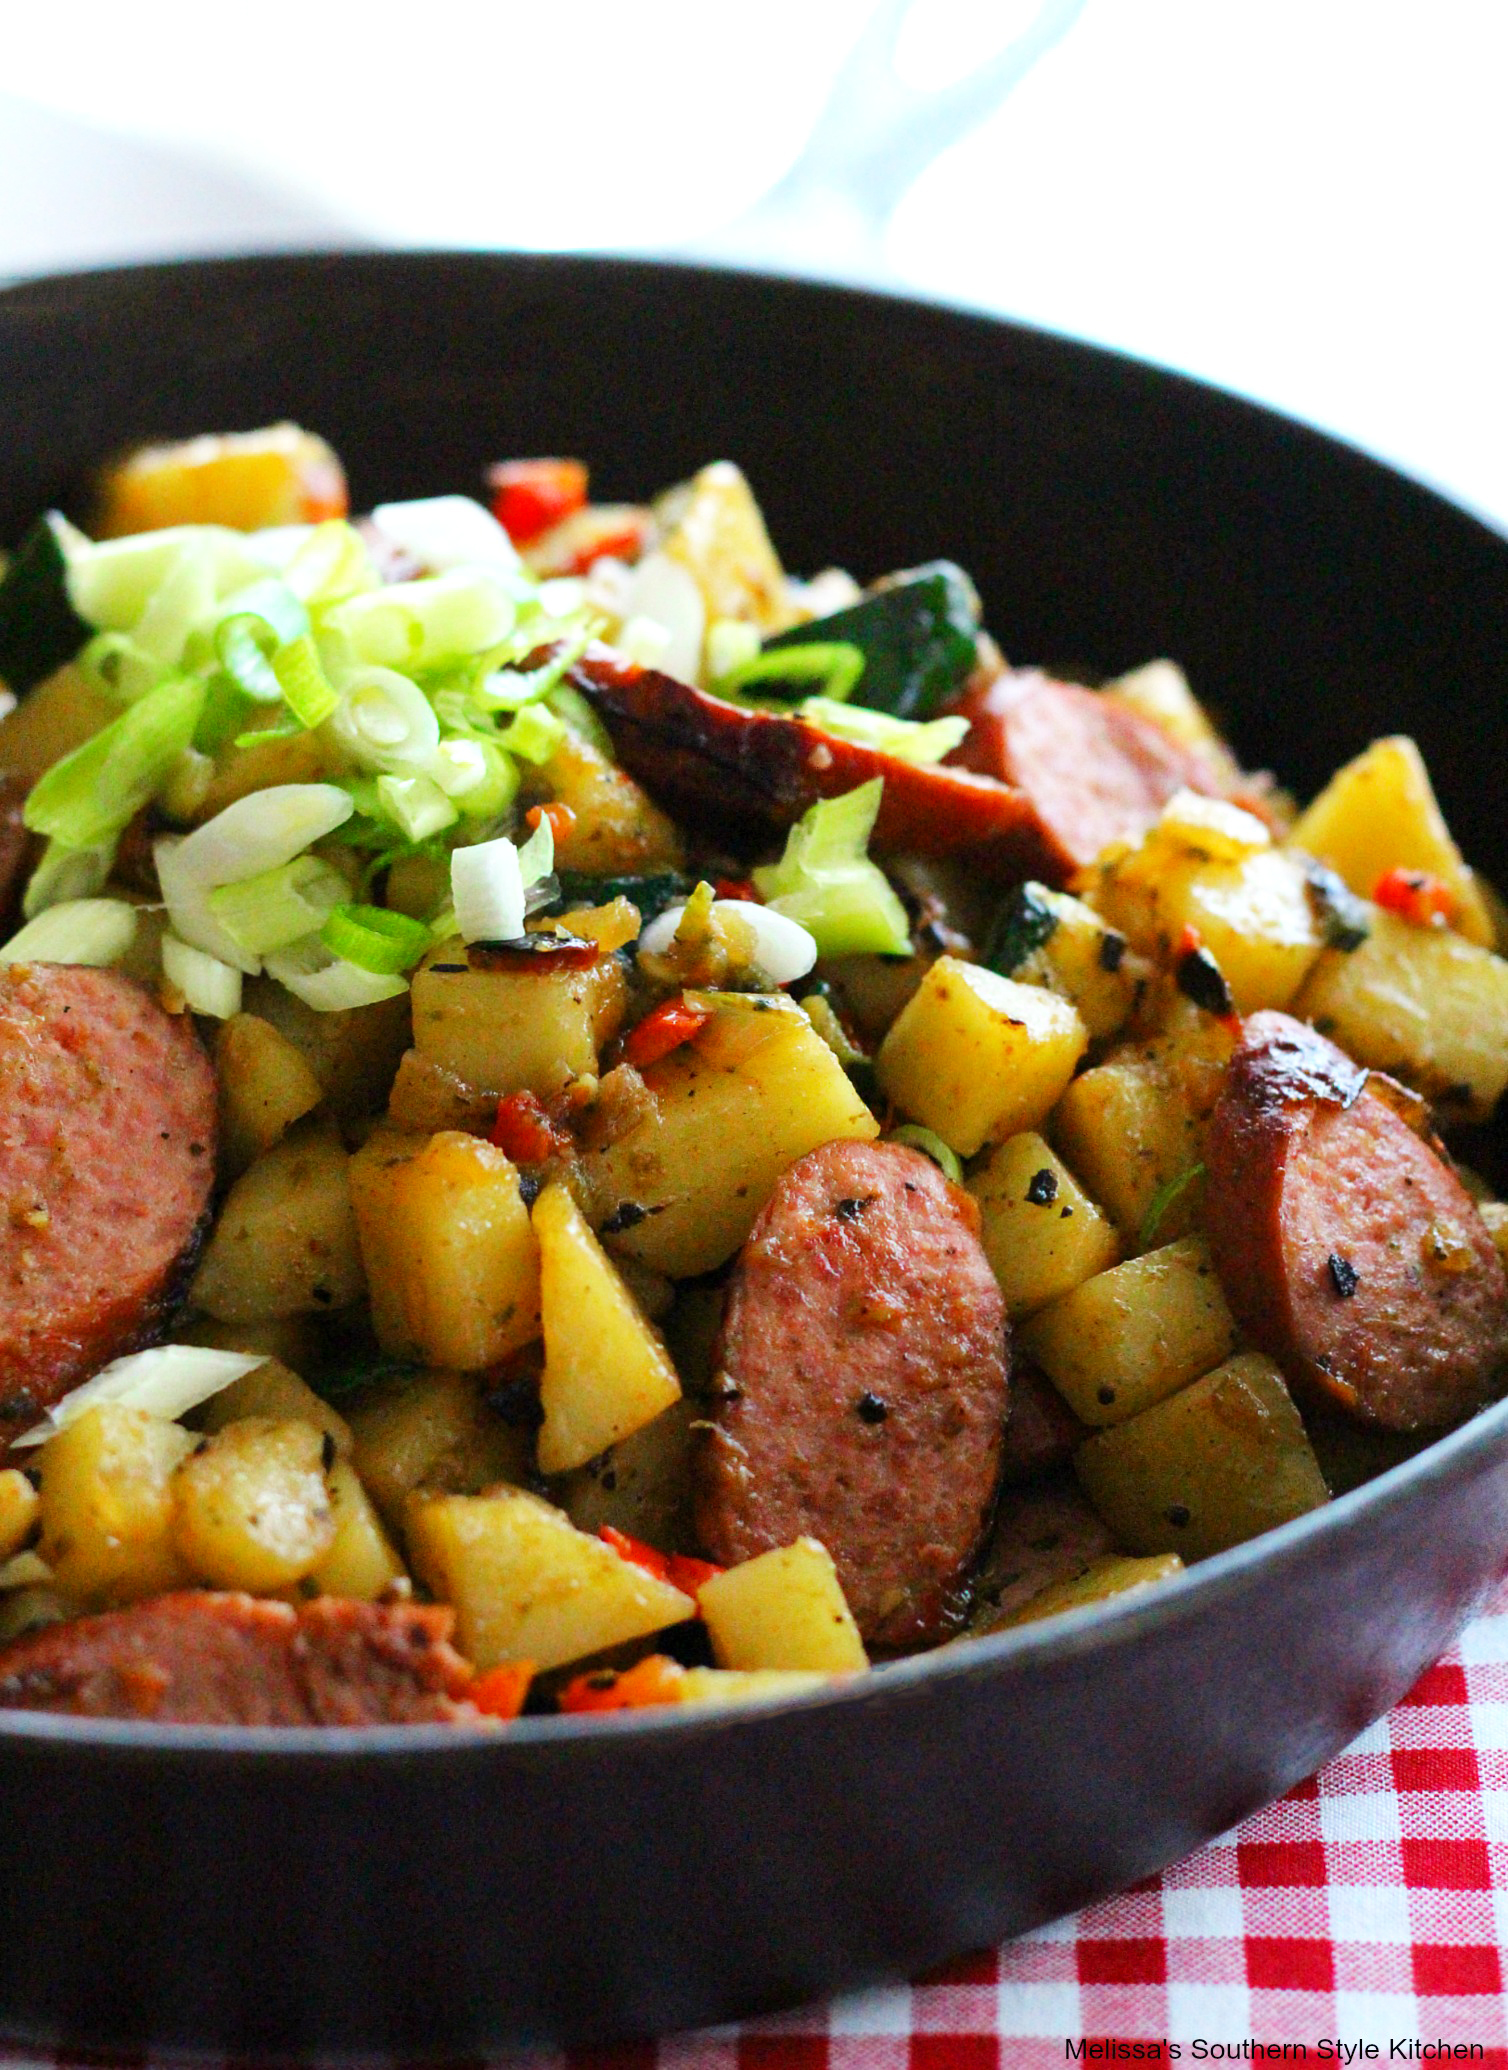 Skillet Potato Hash with Zucchini and Smoked Sausages